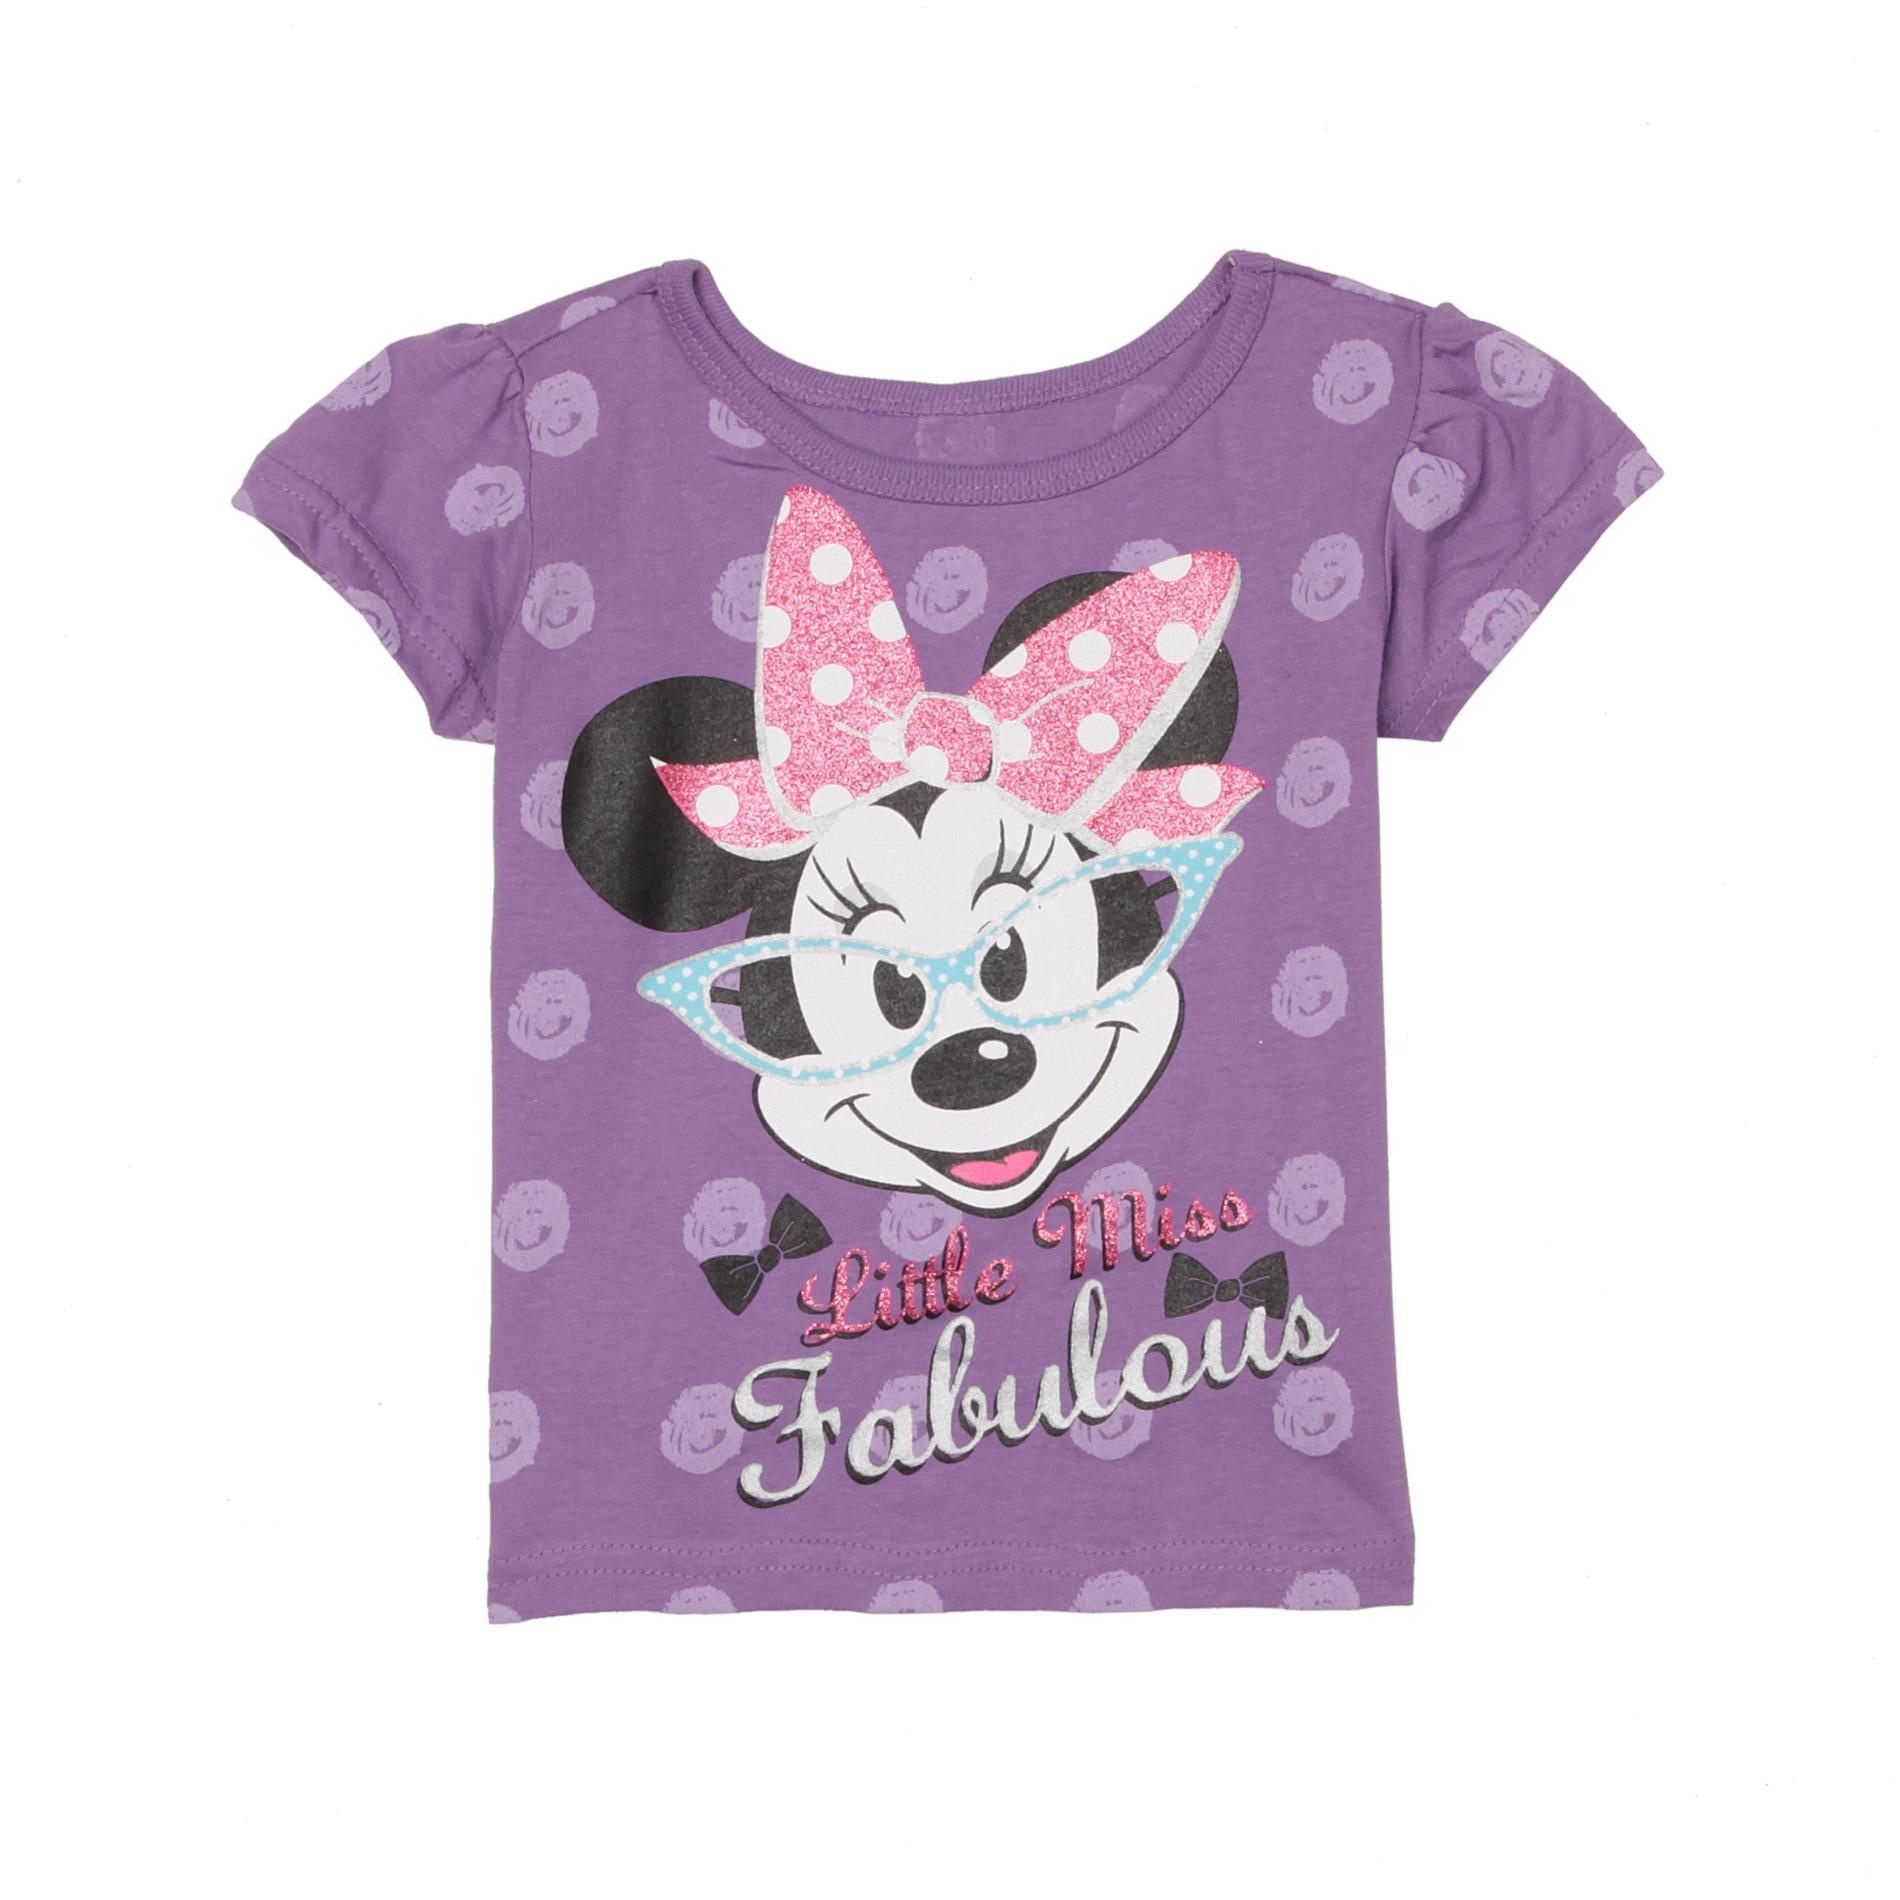 Disney Toddler Girl's T-Shirt - Minnie Mouse